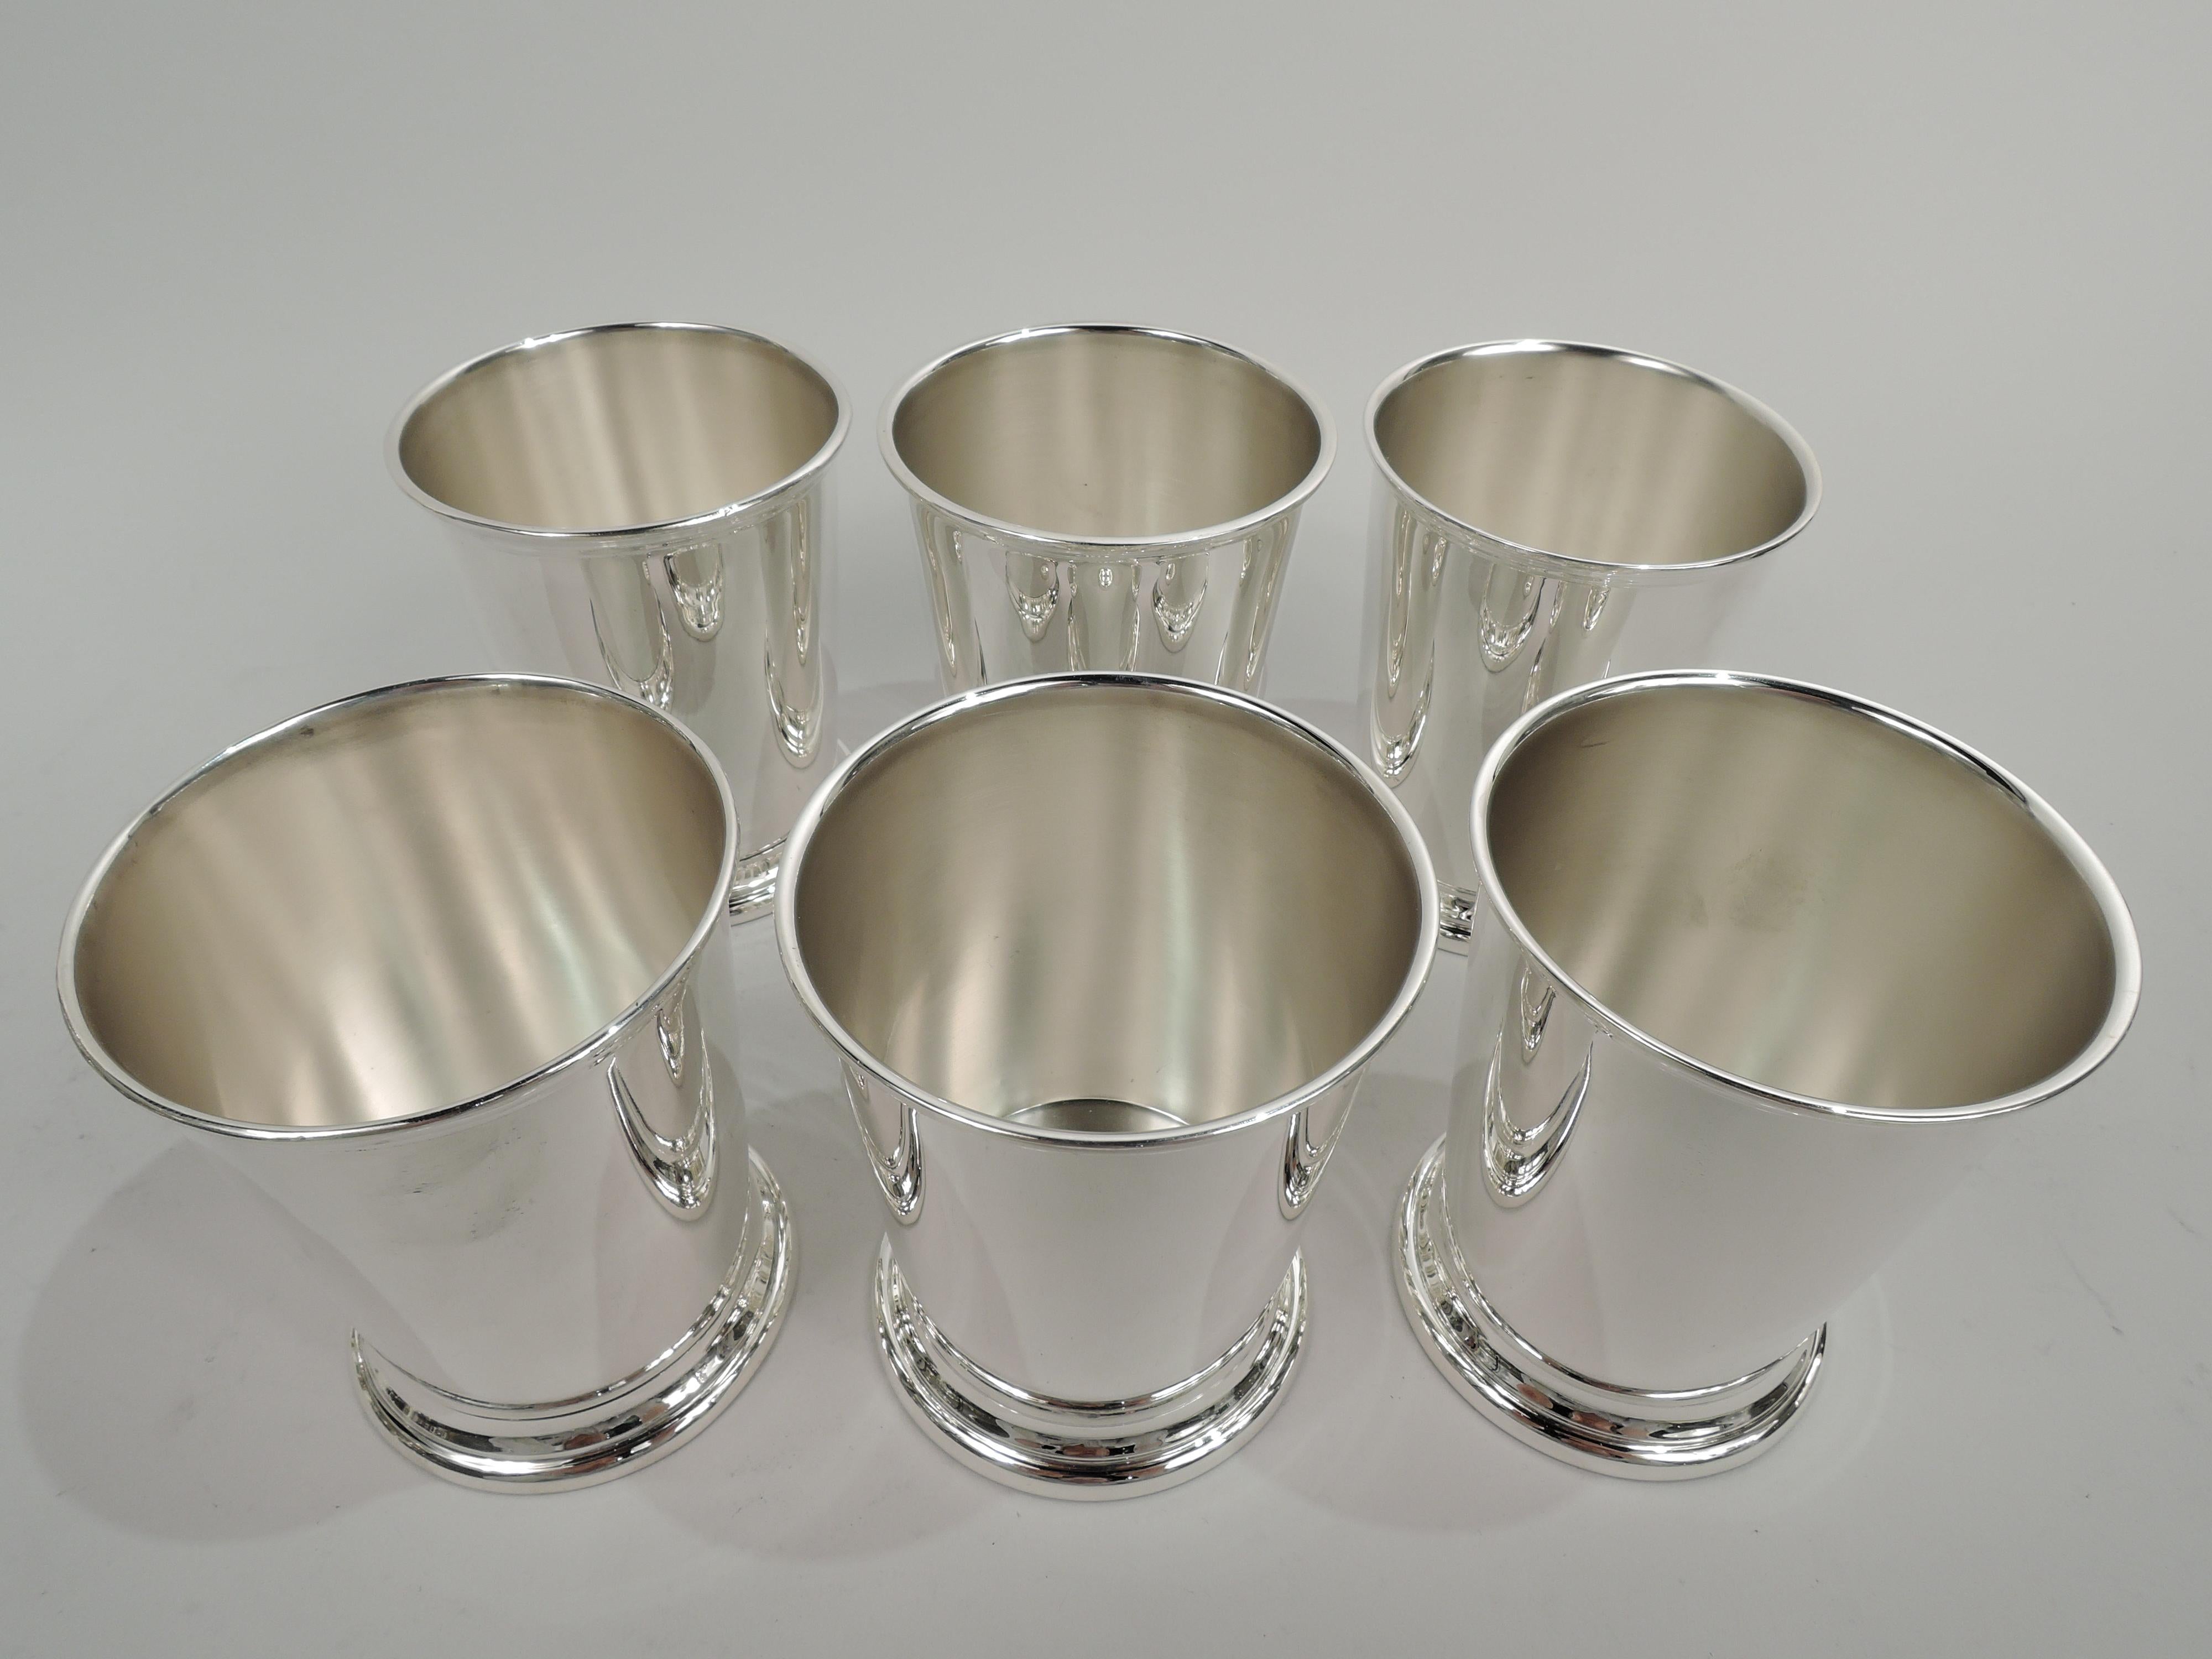 Set of 6 sterling silver mint julep cups. Made by Poole in Wallingford, Connecticut. Each: Straight and tapering sides, molded rim, and skirted foot. Marked “Sterling by Poole” and numbered 58. Total weight: 17.5 troy ounces.